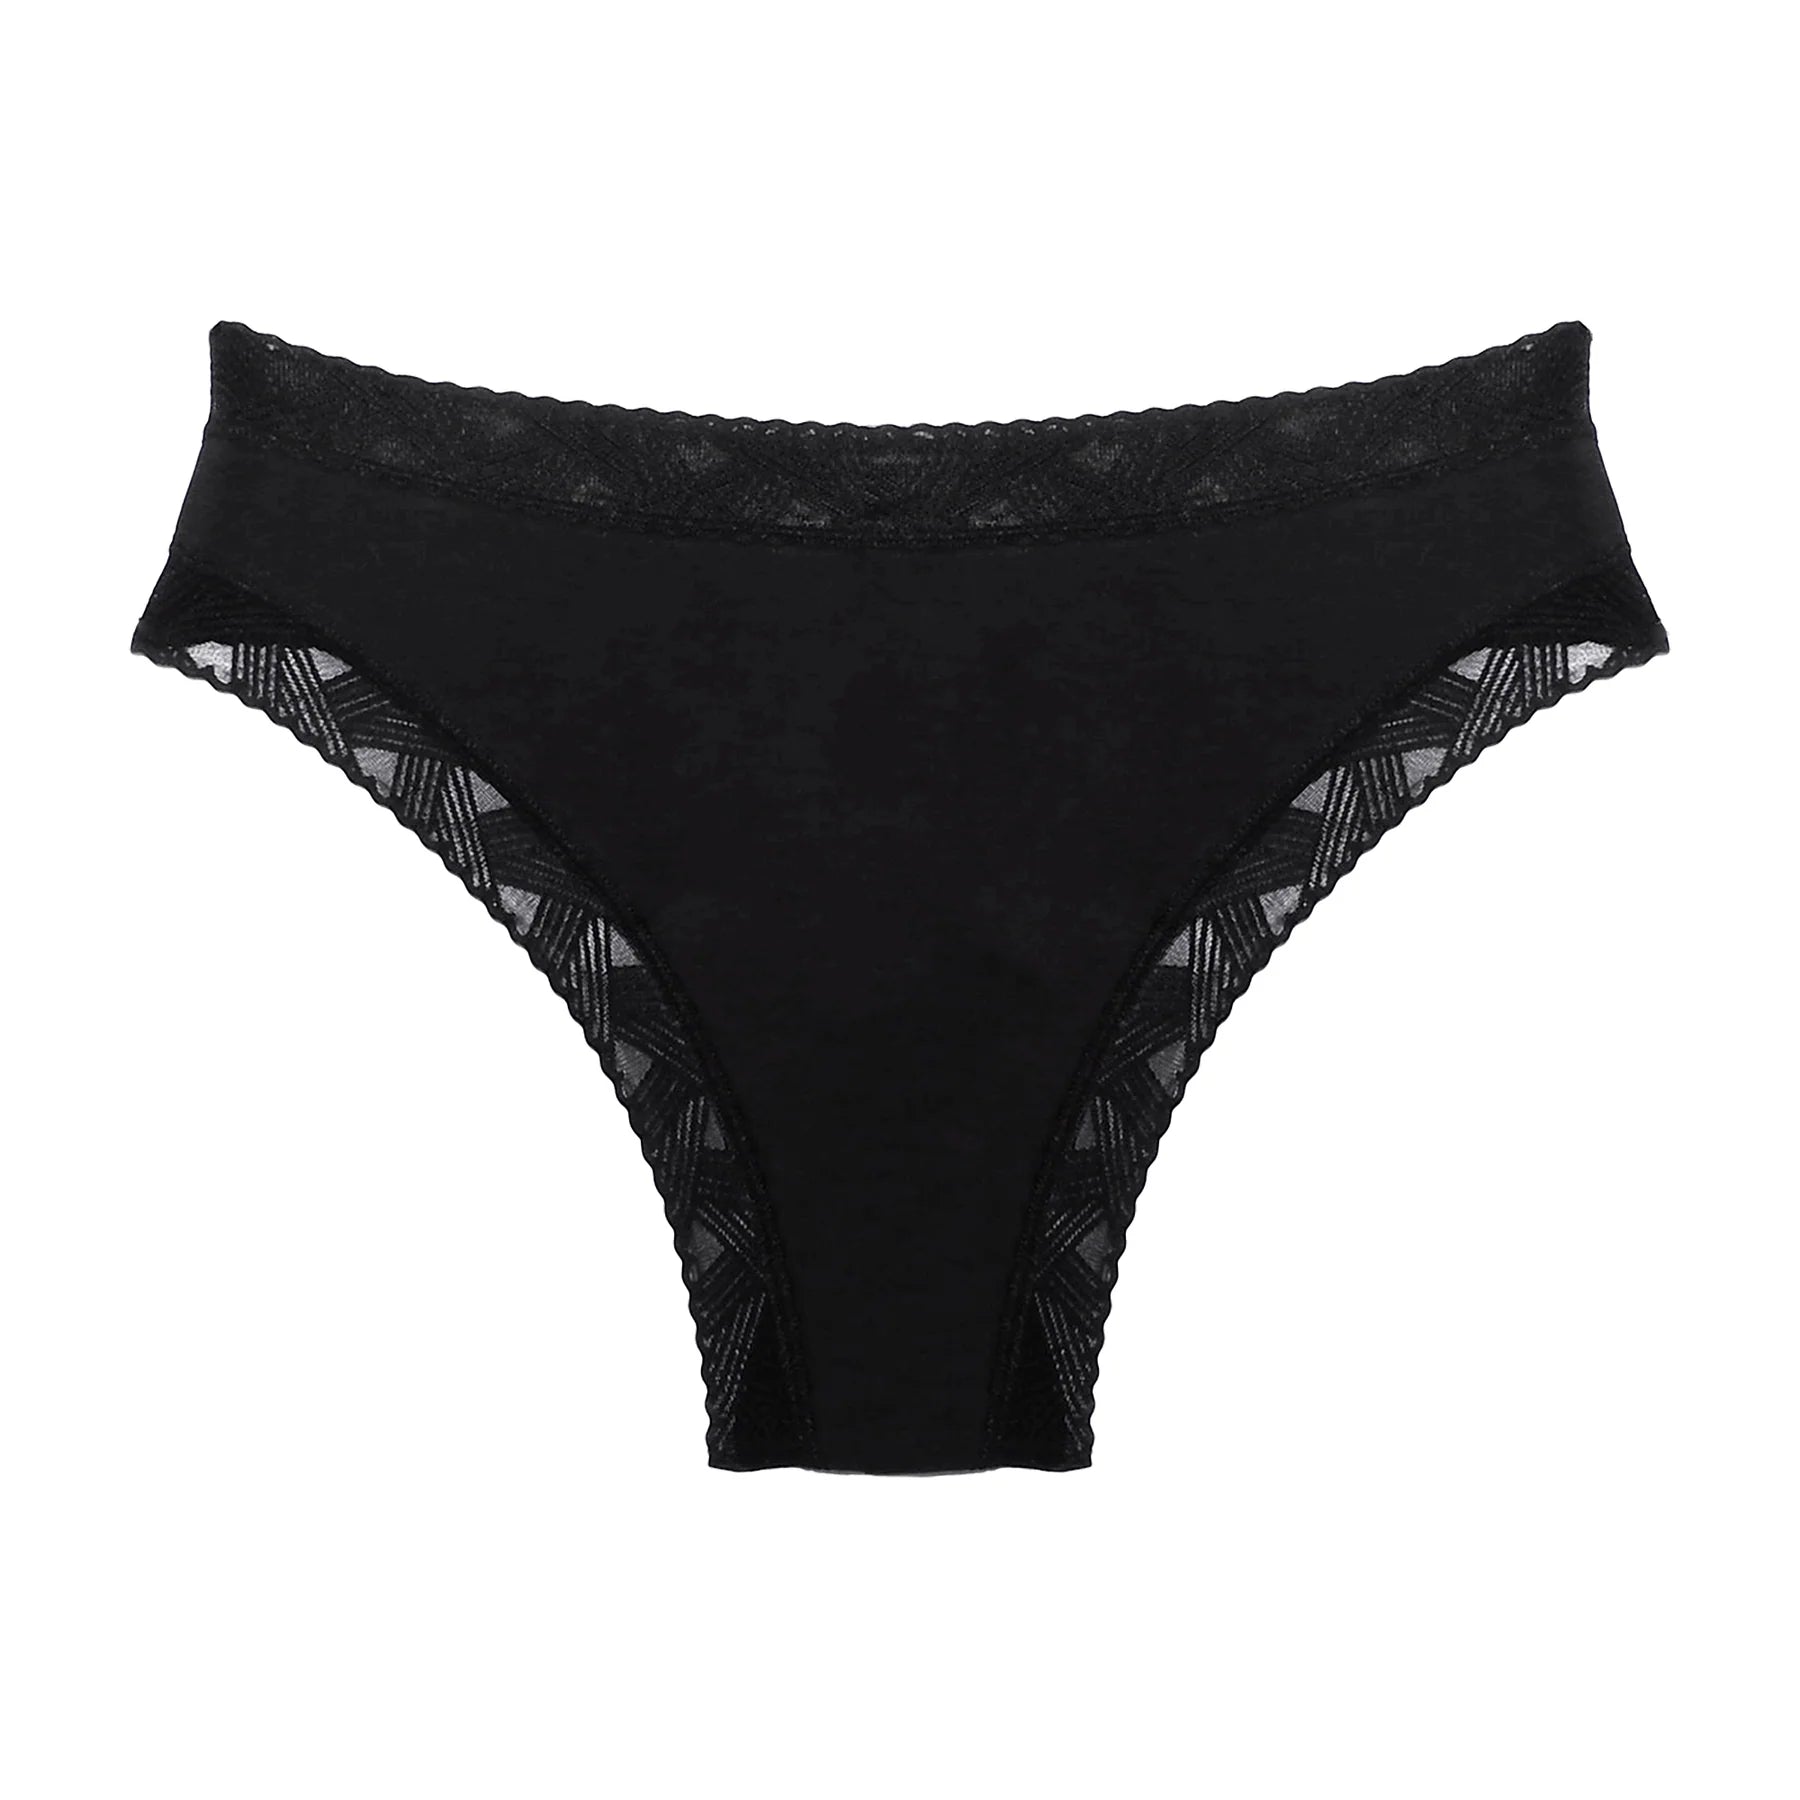 Underprotection Period Thong - Black